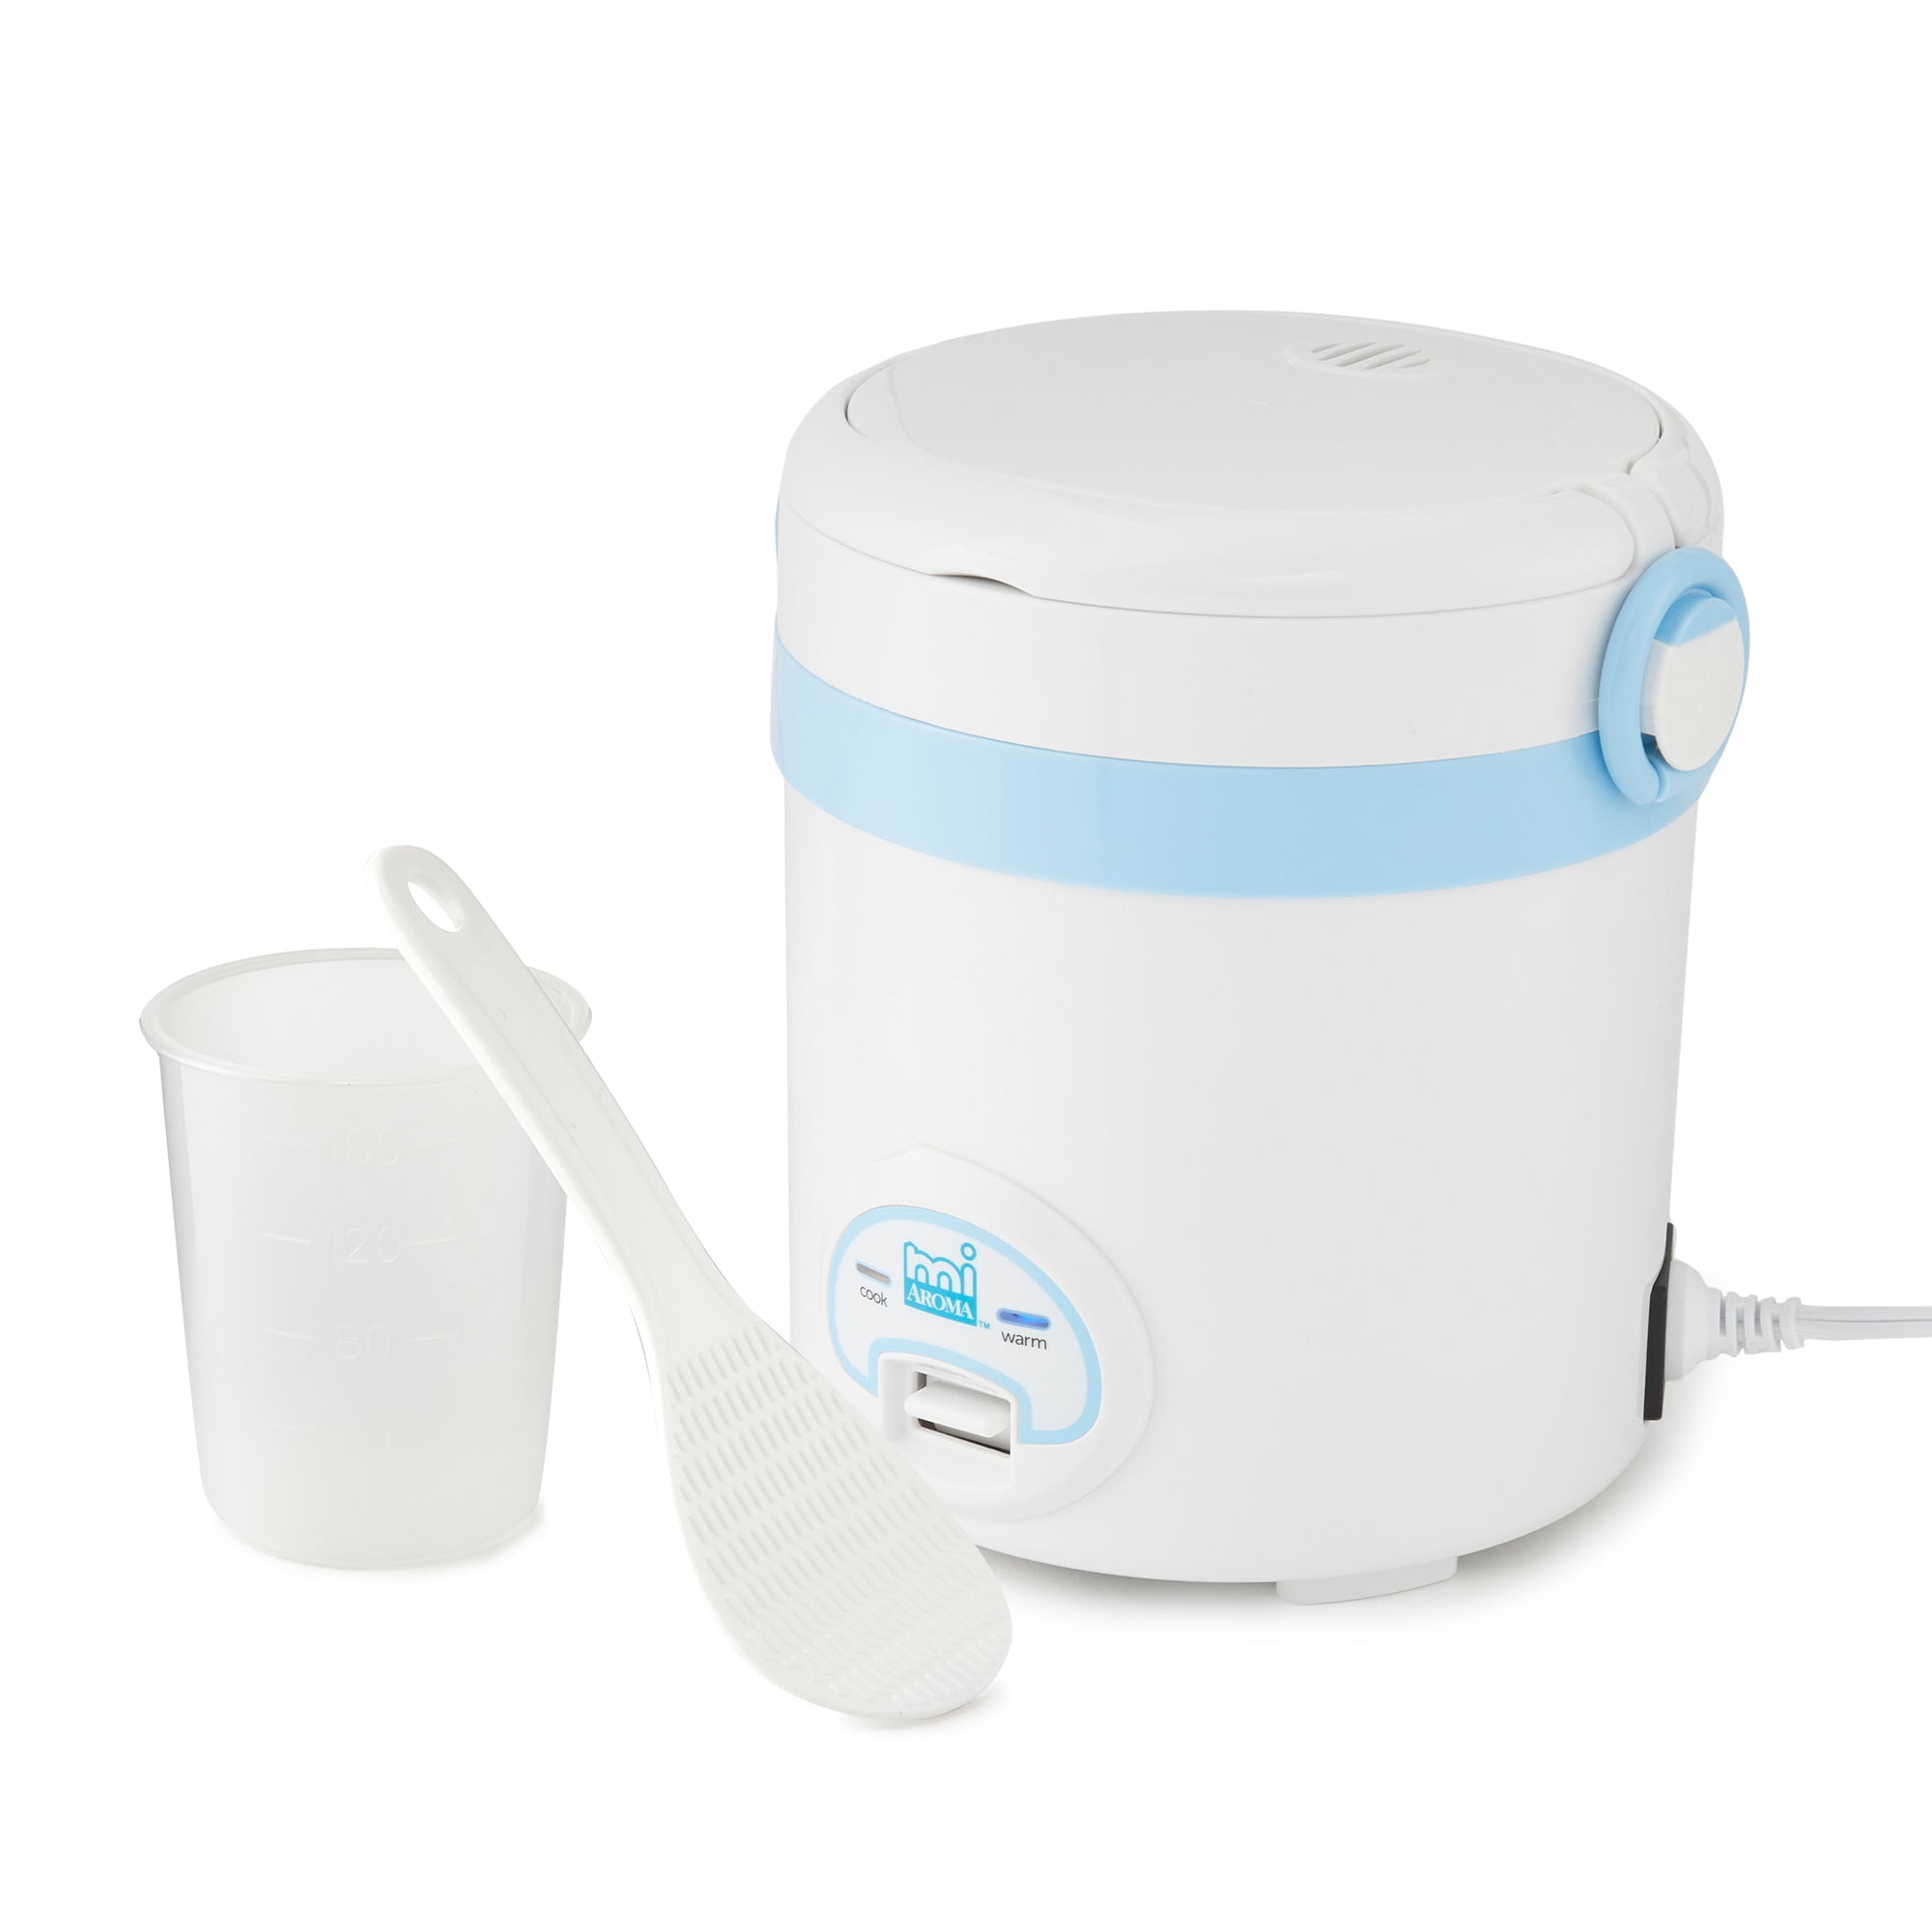 Aroma Mini 3-Cup Digital Cool Touch Rice Cooker - White